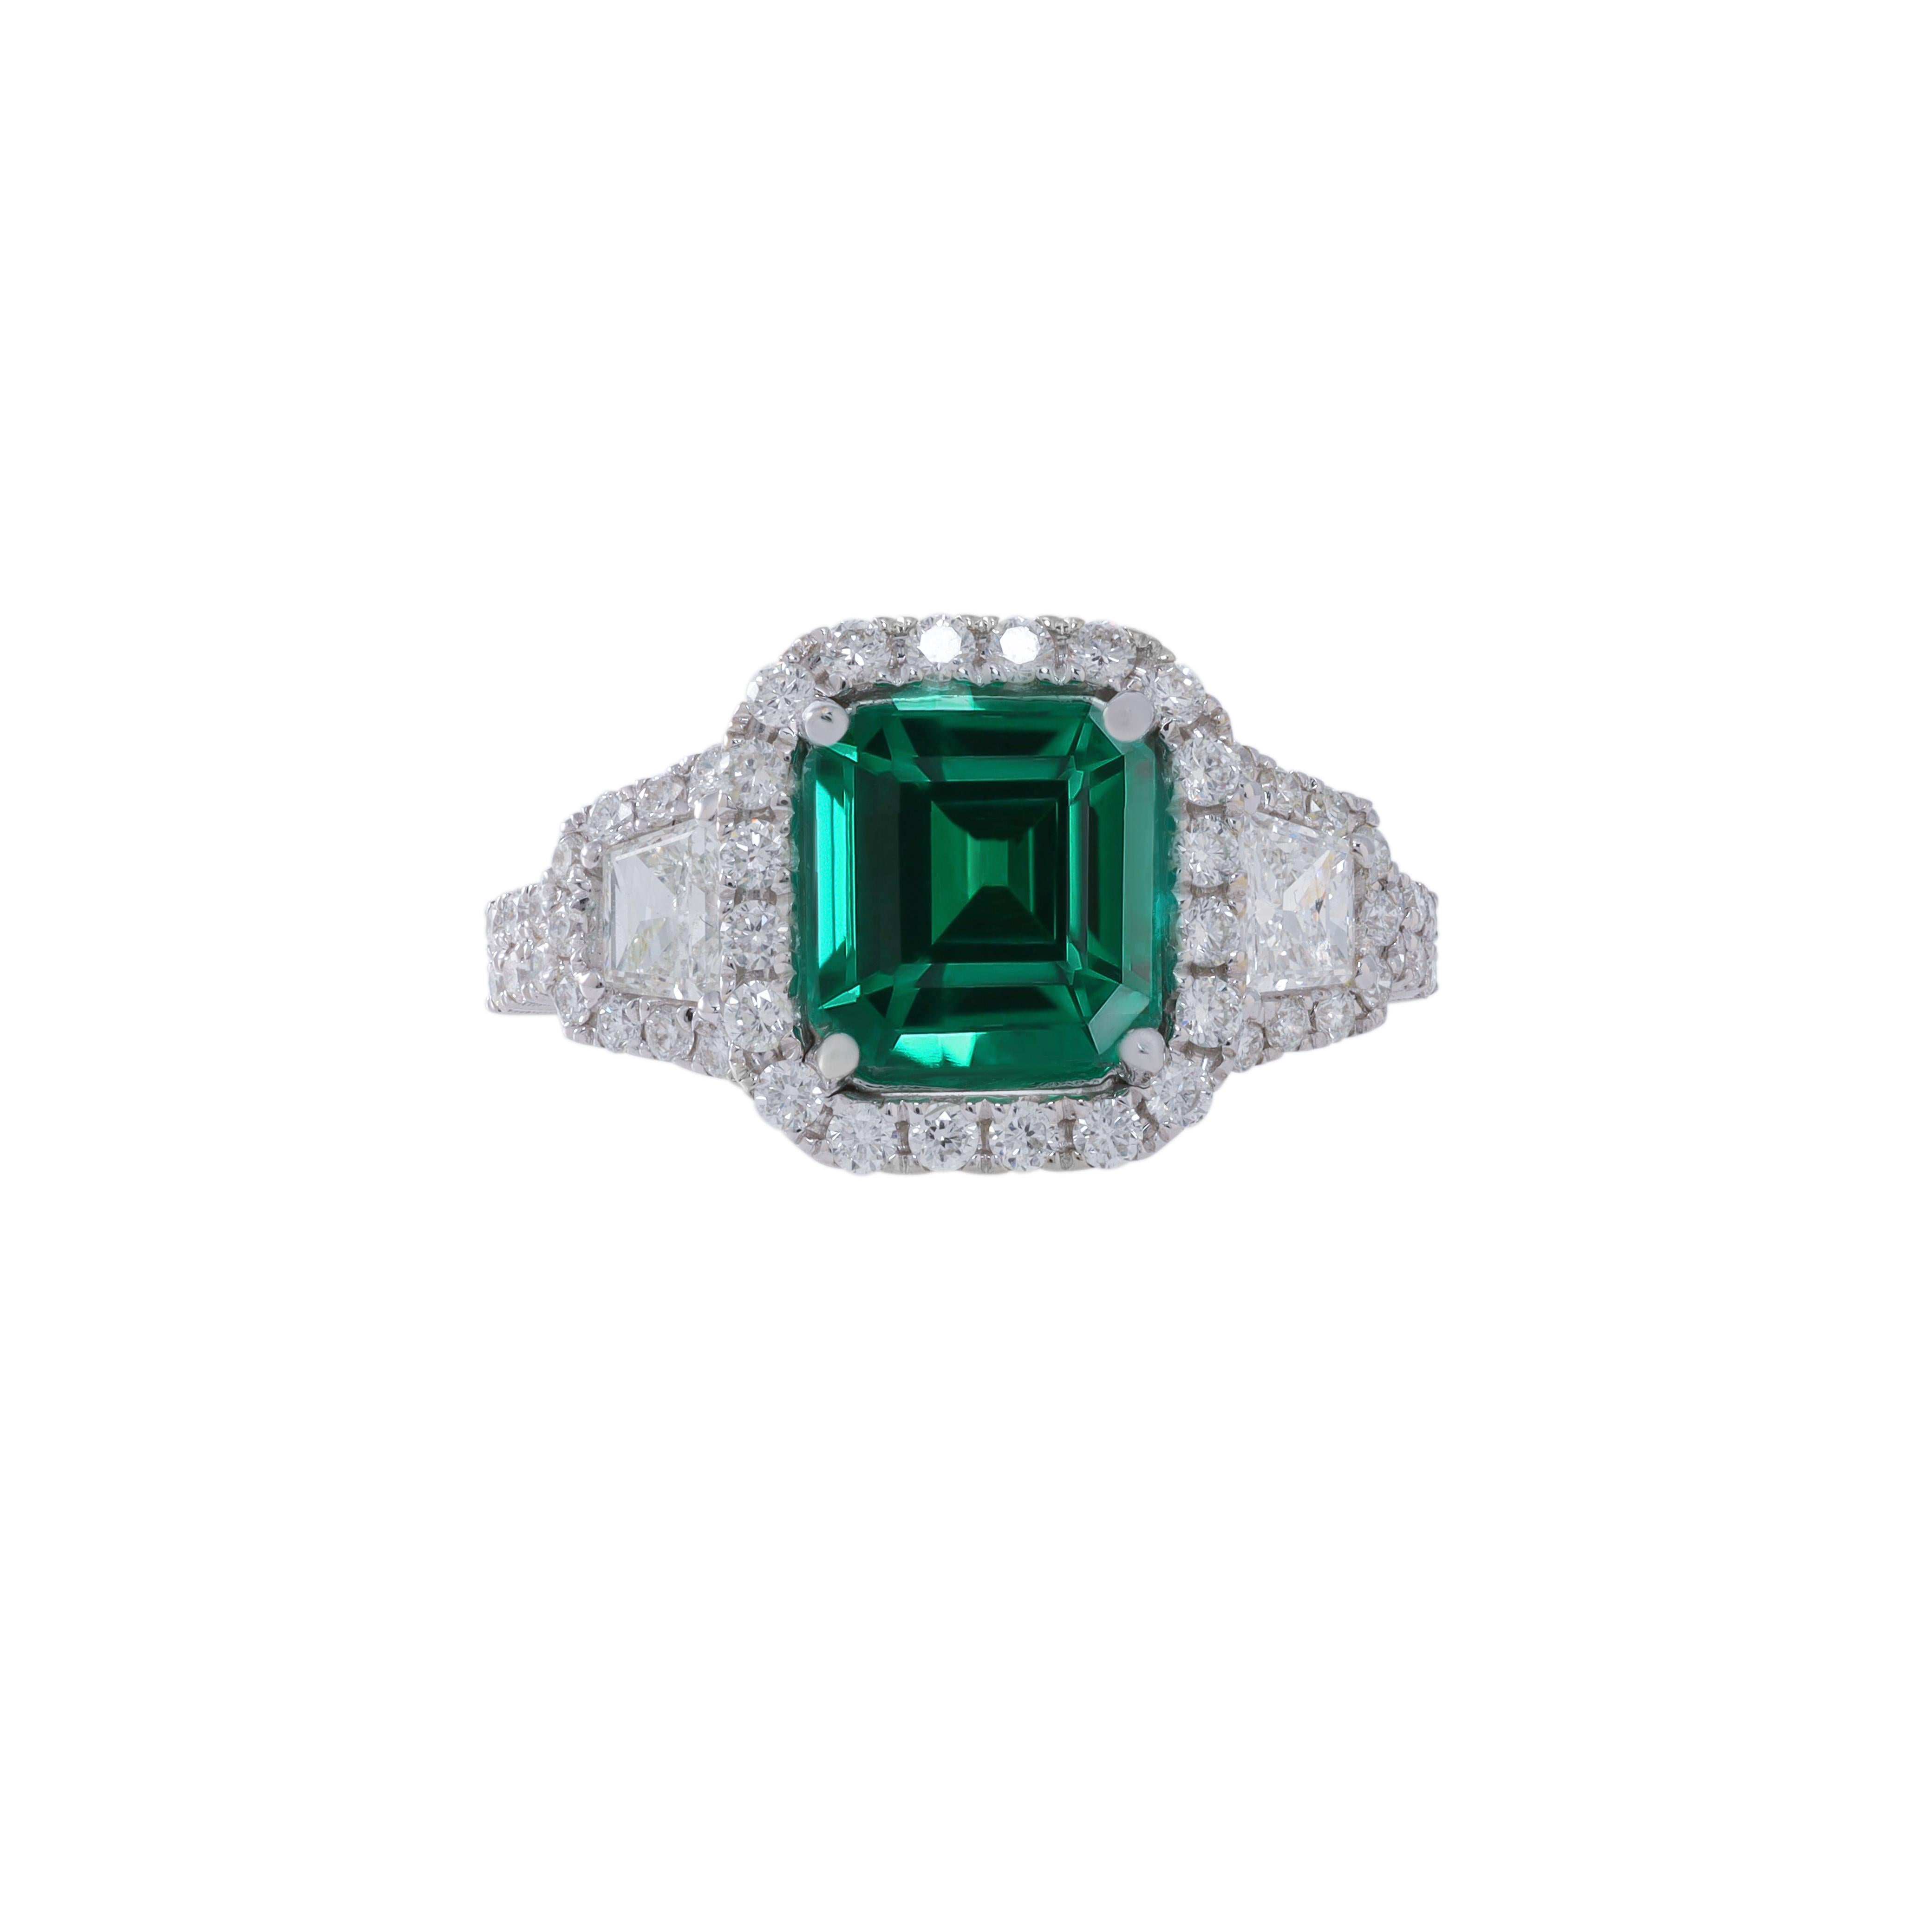 Emerald Cut 18k Wg Ring Diamond with 0.59ct Trp Diamond and Emerald 2.15ct For Sale